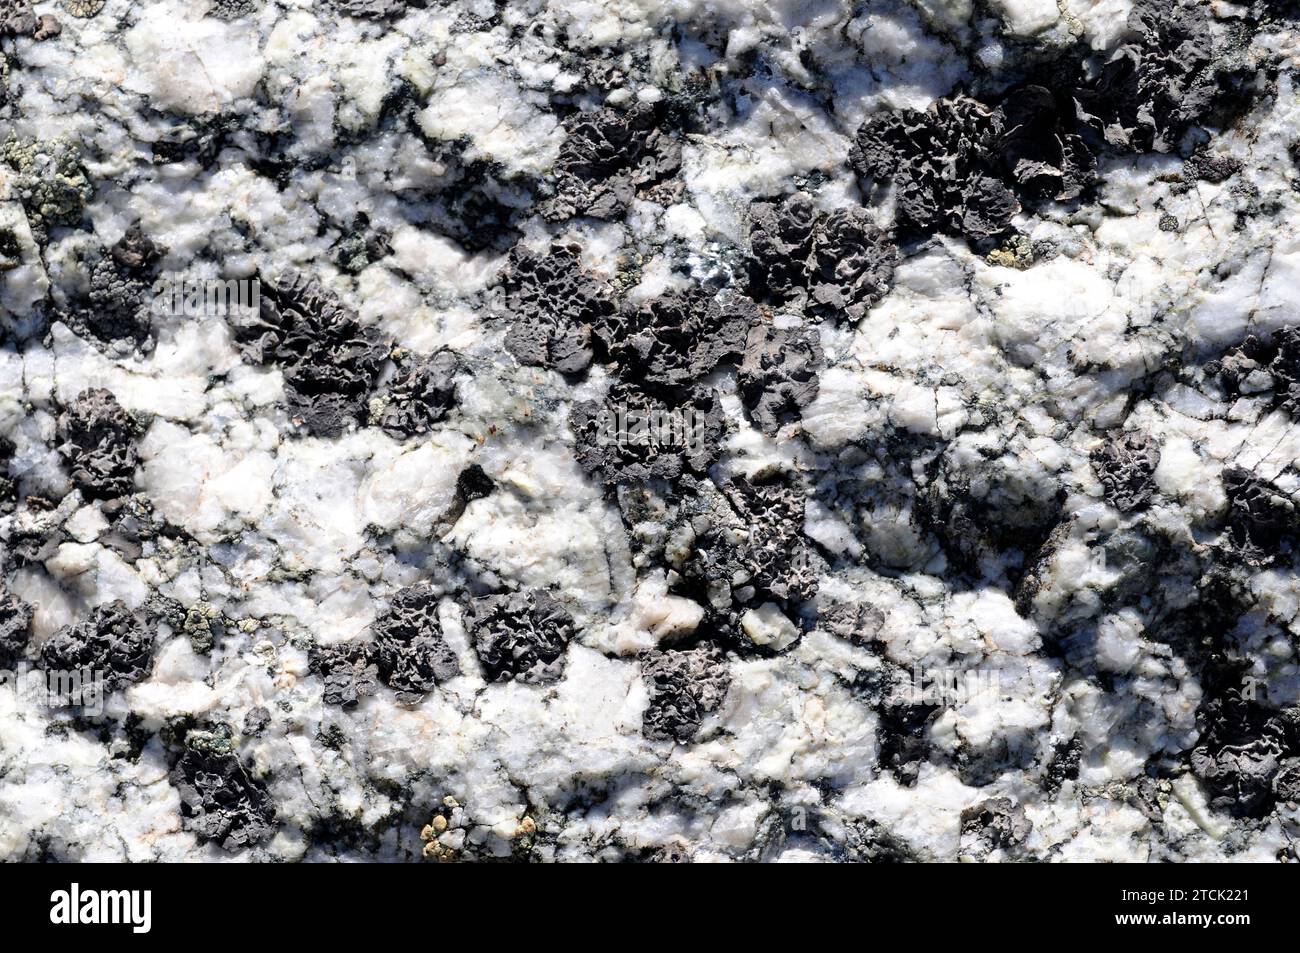 Umbilicaria deusta is a foliose lichen that grows on siliceous rocks. This photo was taken in french Alps. Stock Photo